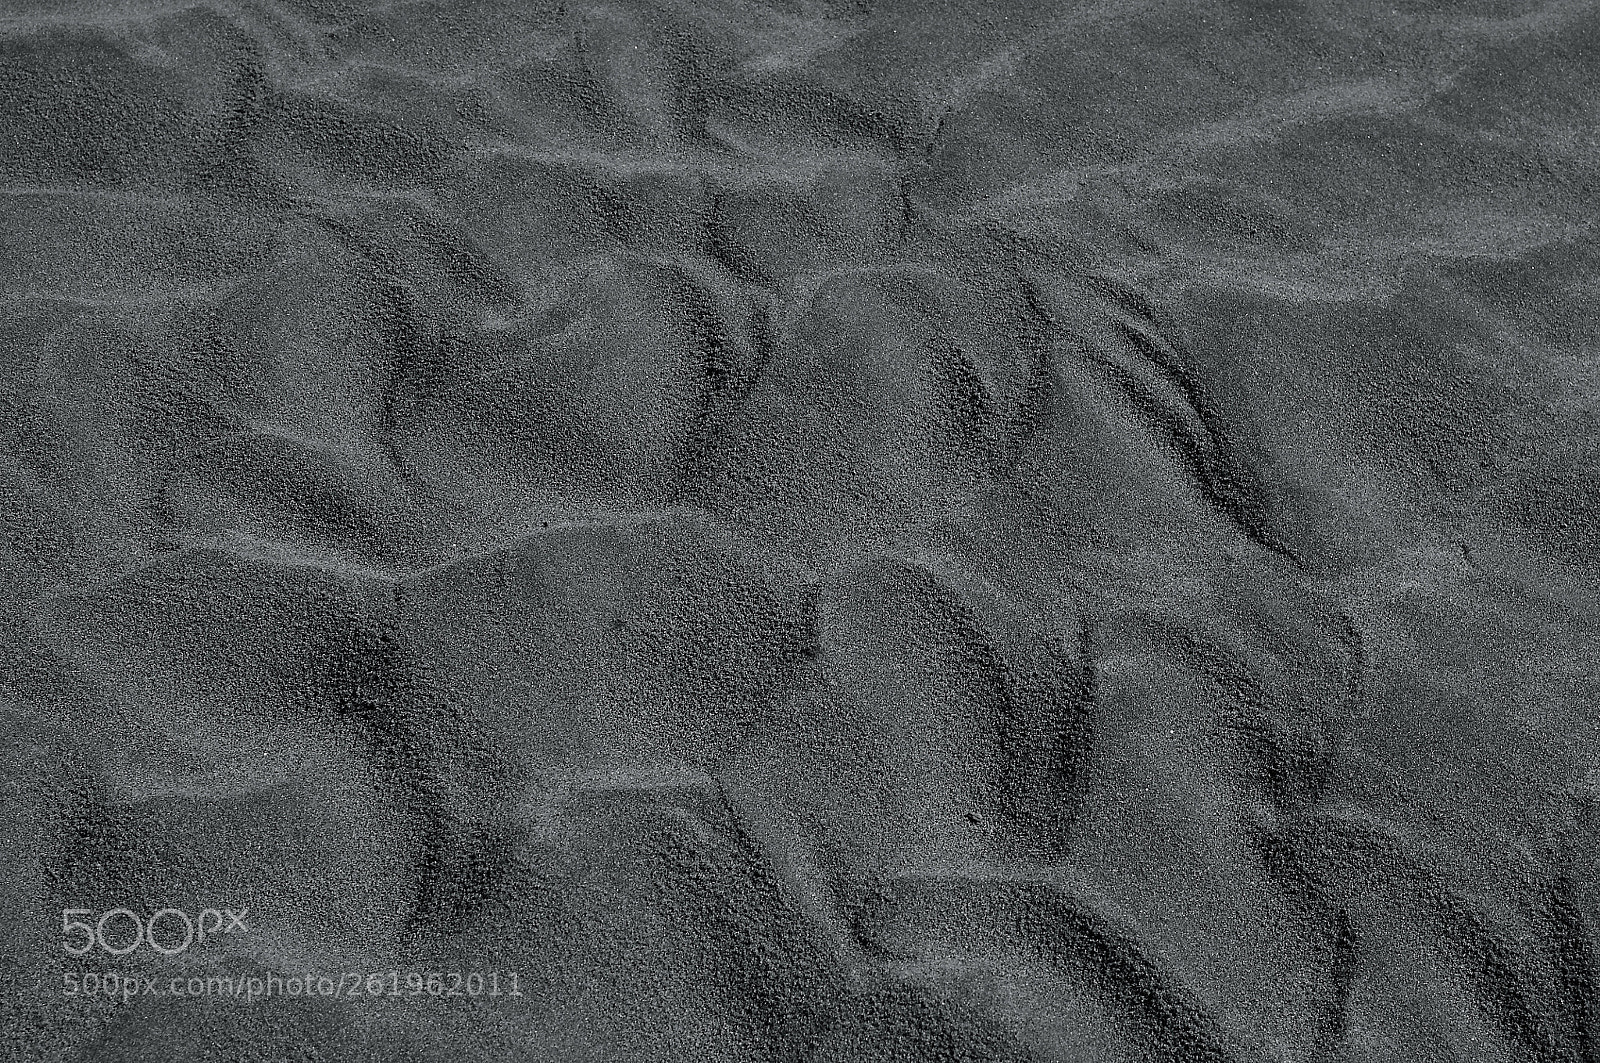 Pentax K-r sample photo. Sand in black and photography